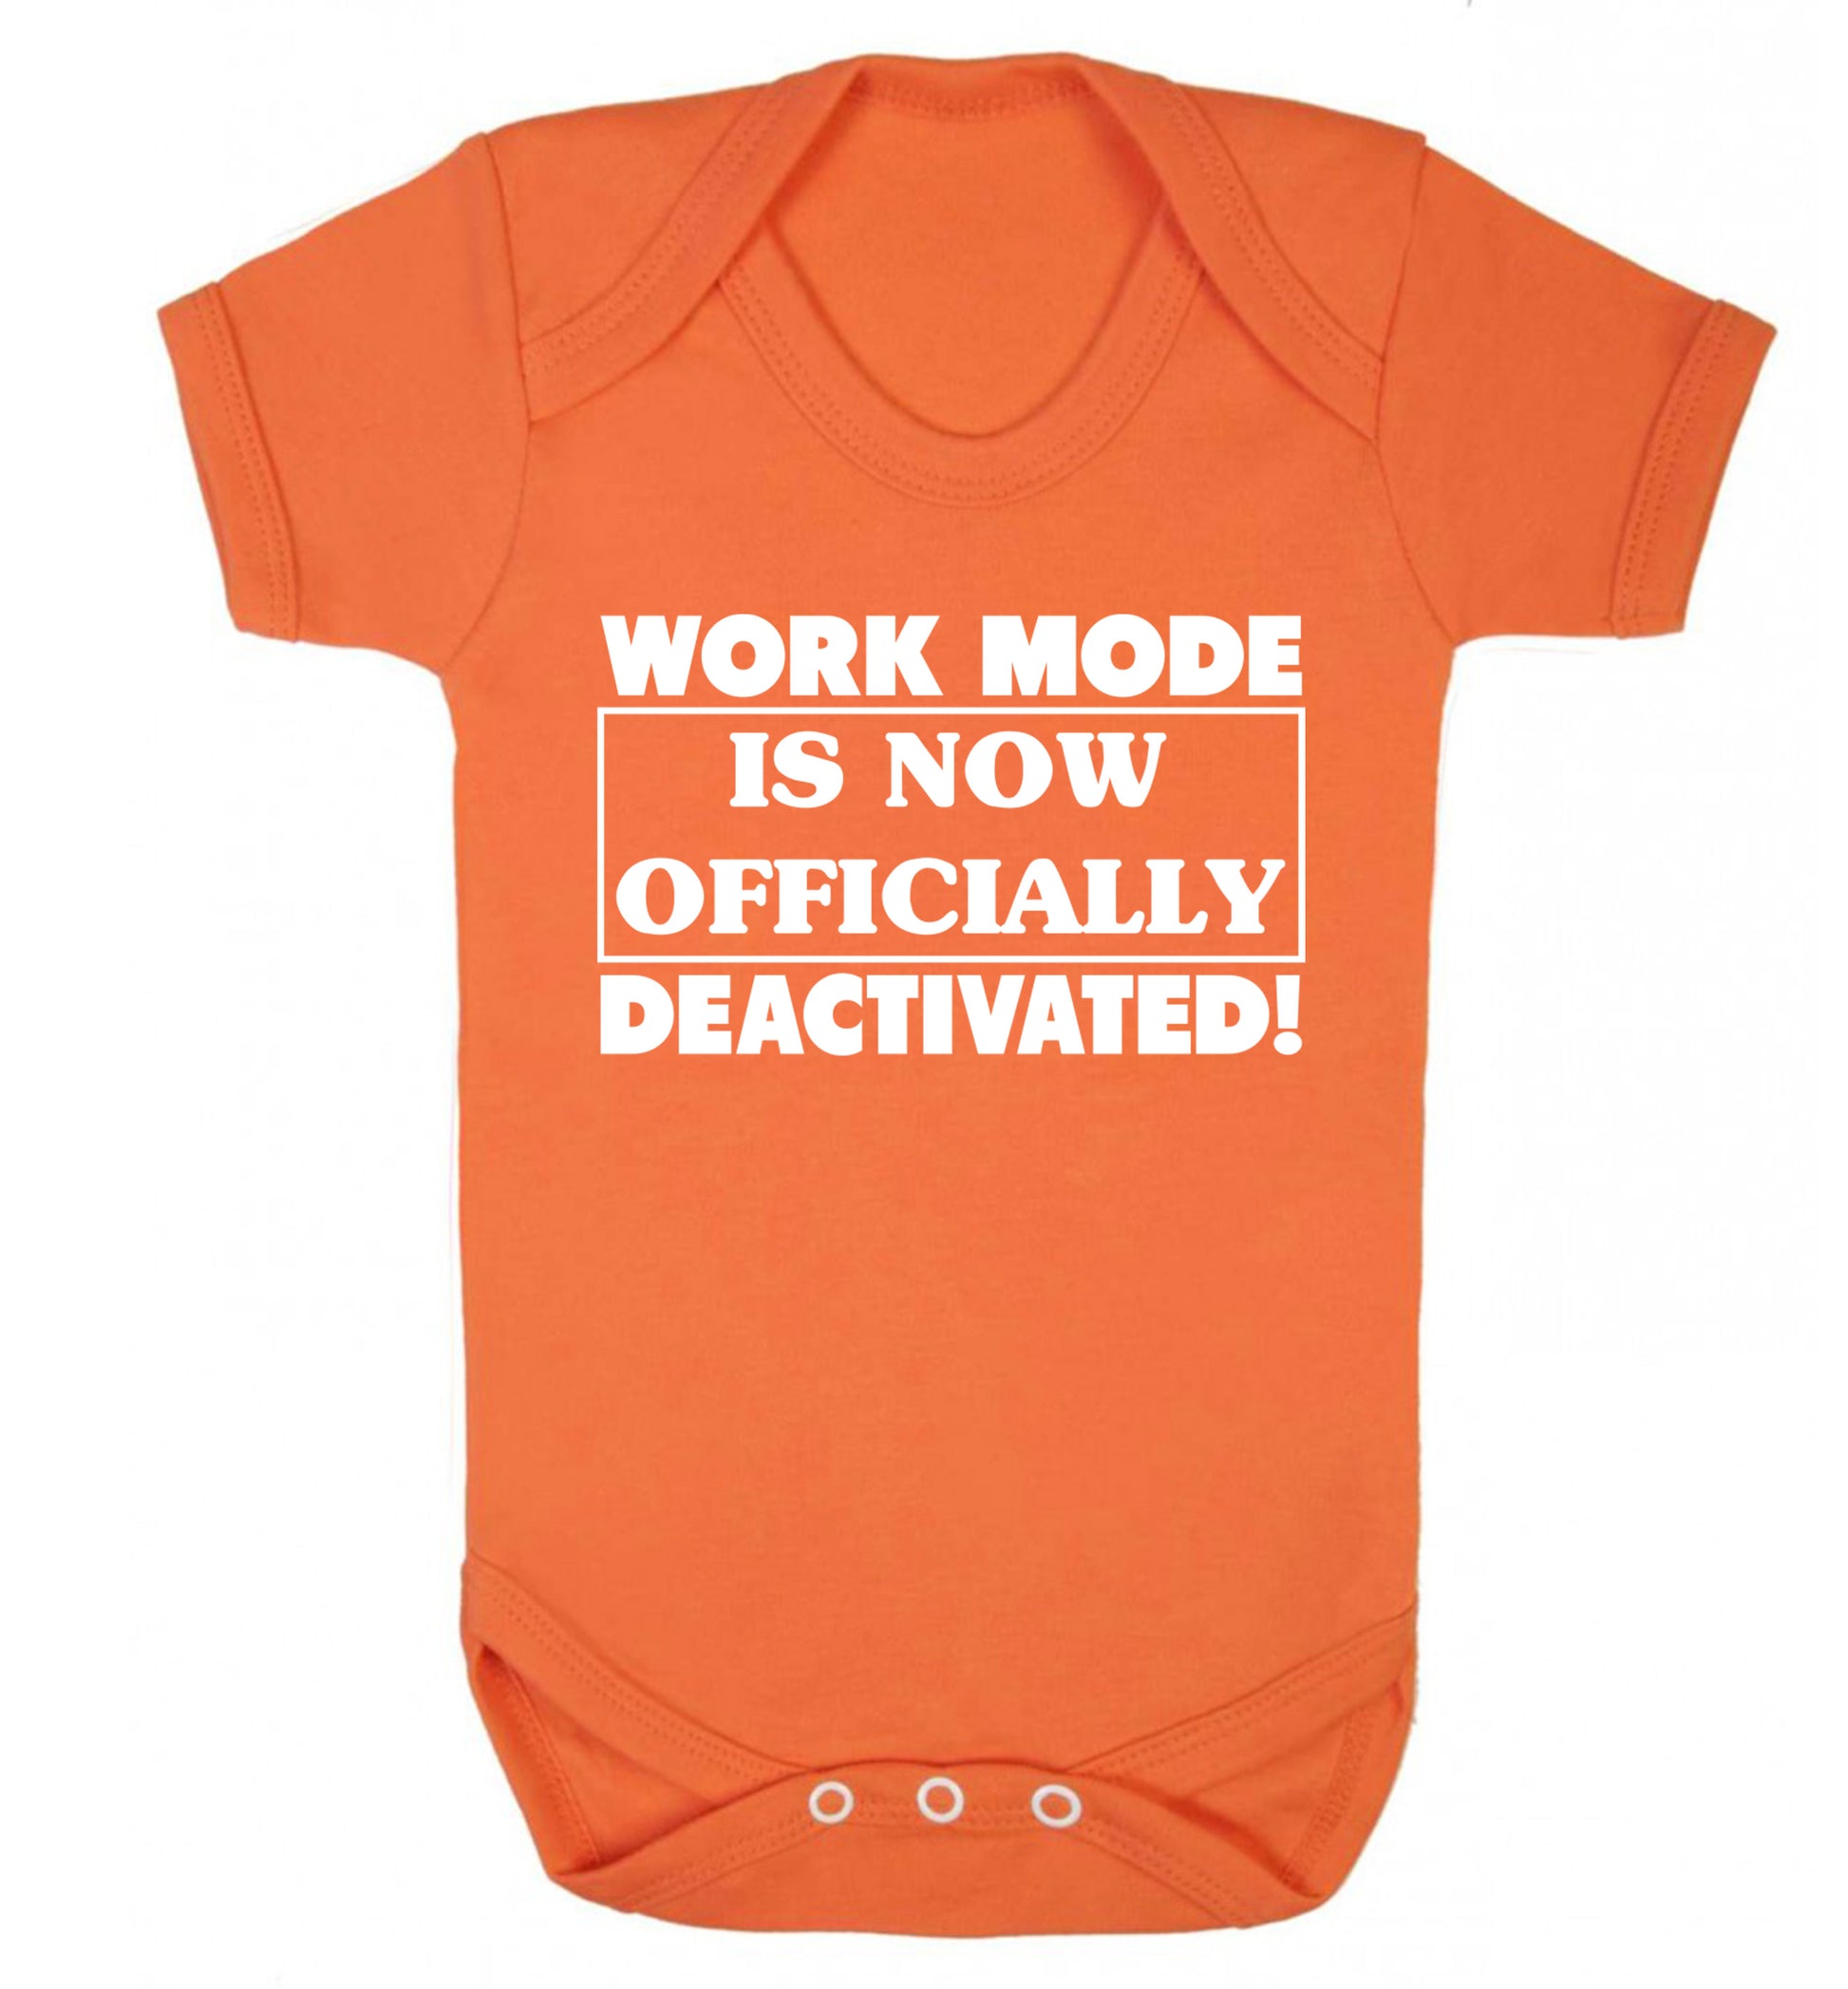 Work mode is now officially deactivated Baby Vest orange 18-24 months